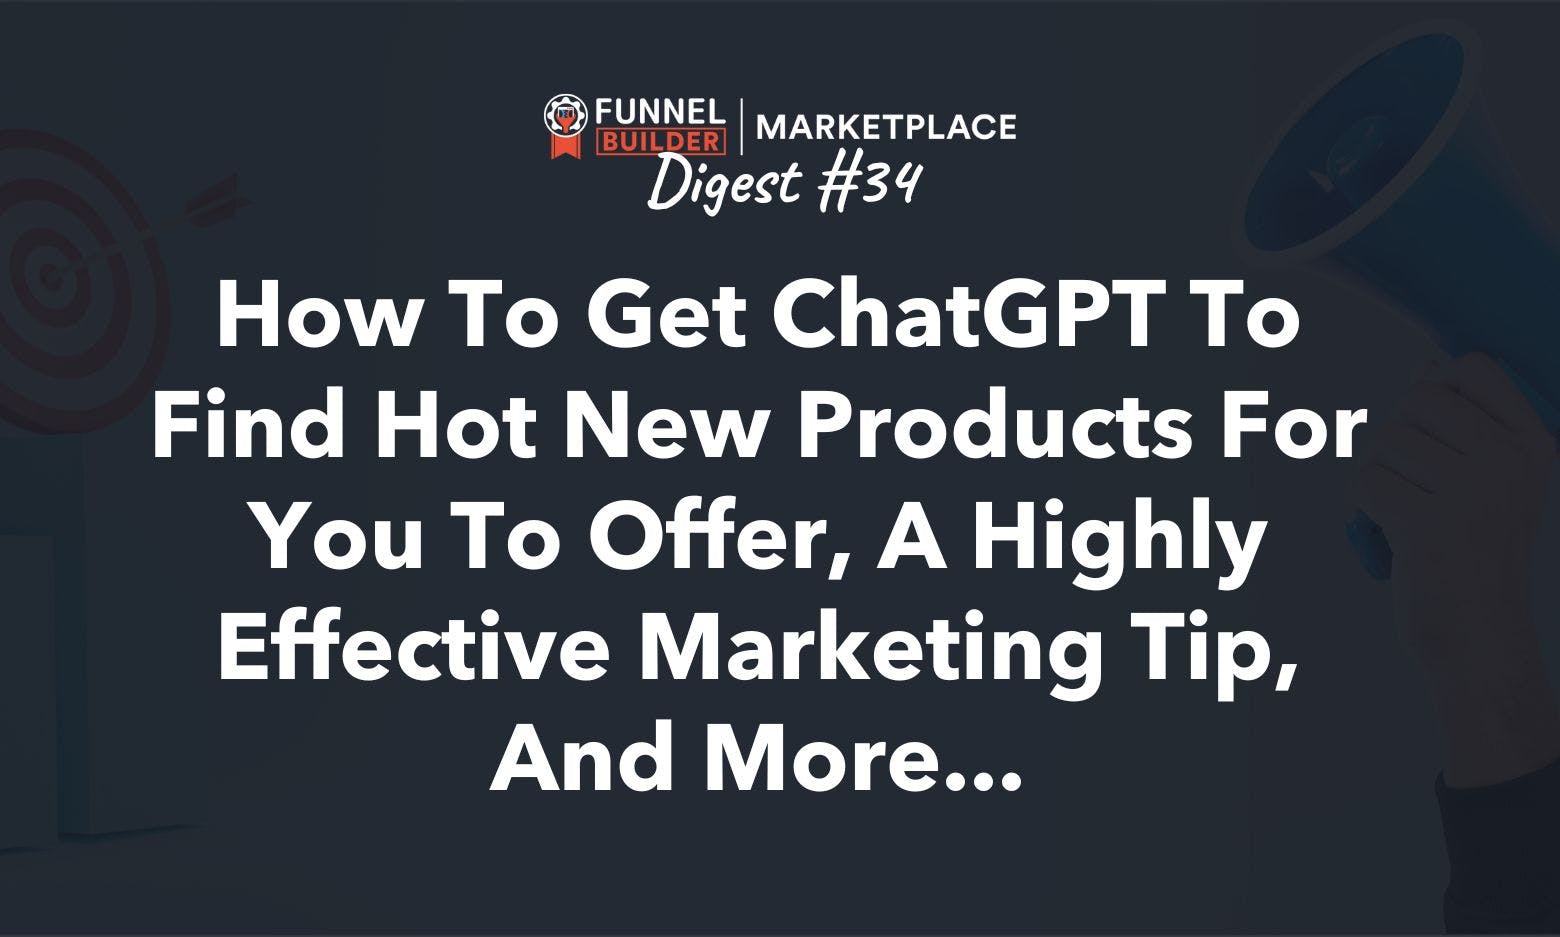 FBM Digest #34: How to get ChatGPT to find hot new products for you to offer, a highly effective marketing tip, and more...